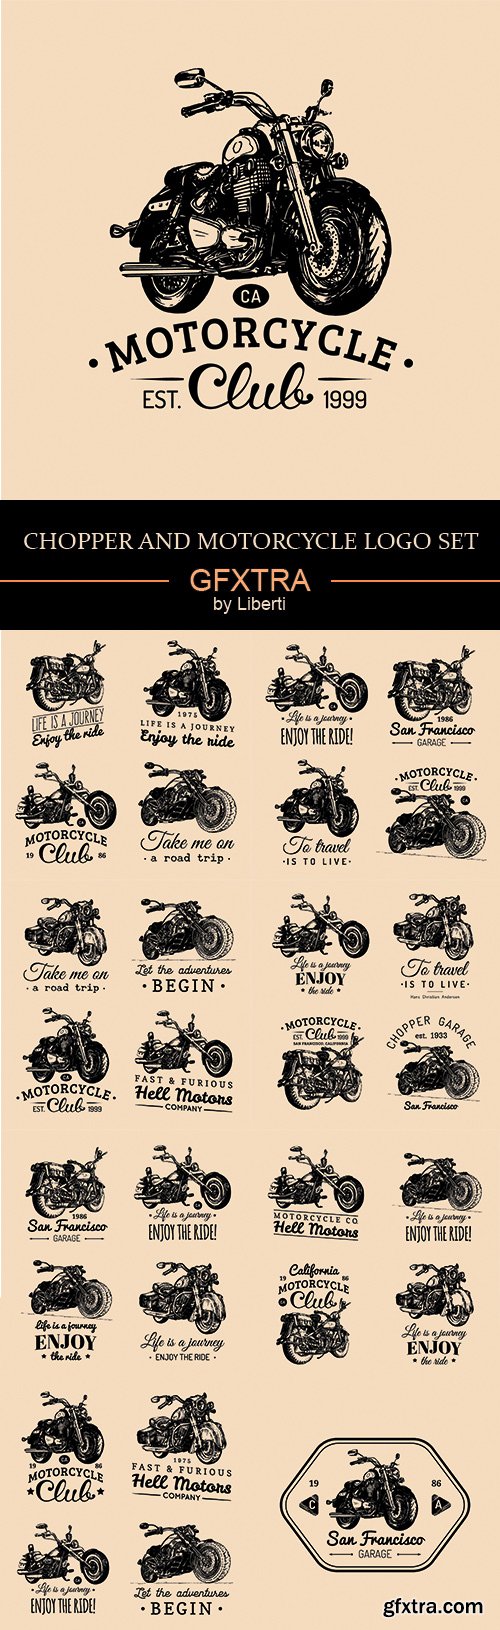 Chopper and motorcycle logo set